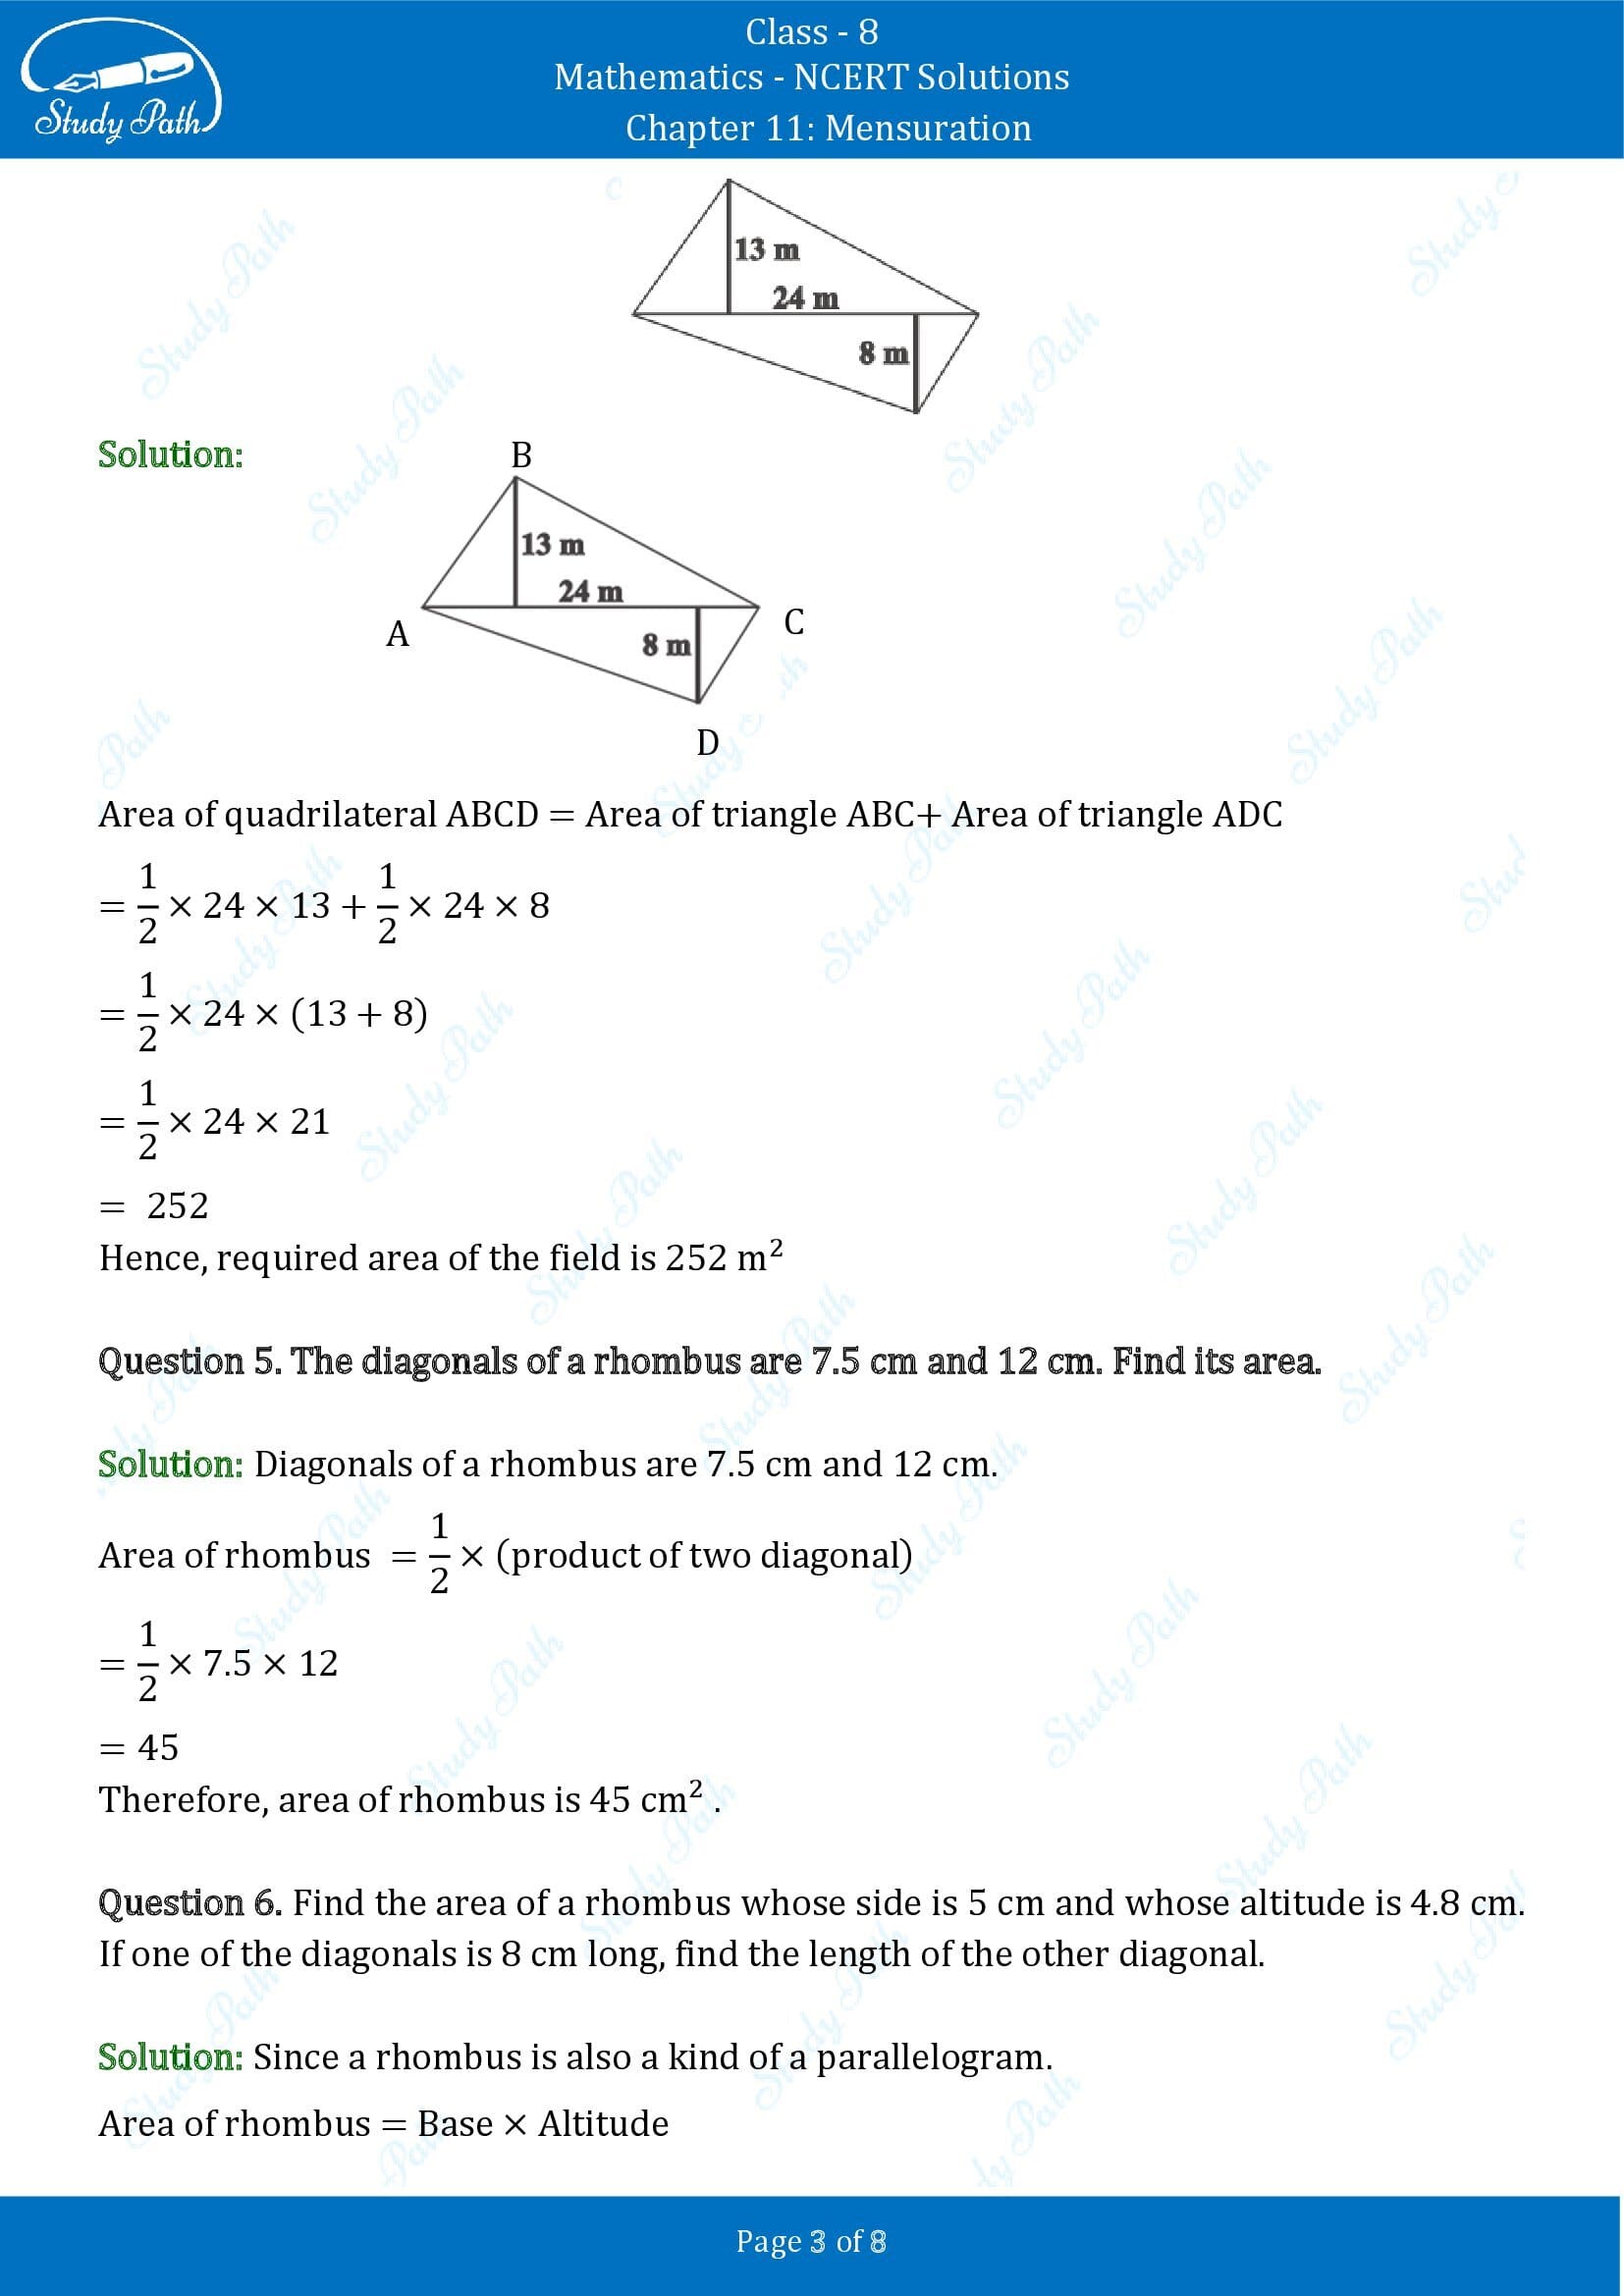 NCERT Solutions for Class 8 Maths Chapter 11 Mensuration Exercise 11.2 00003